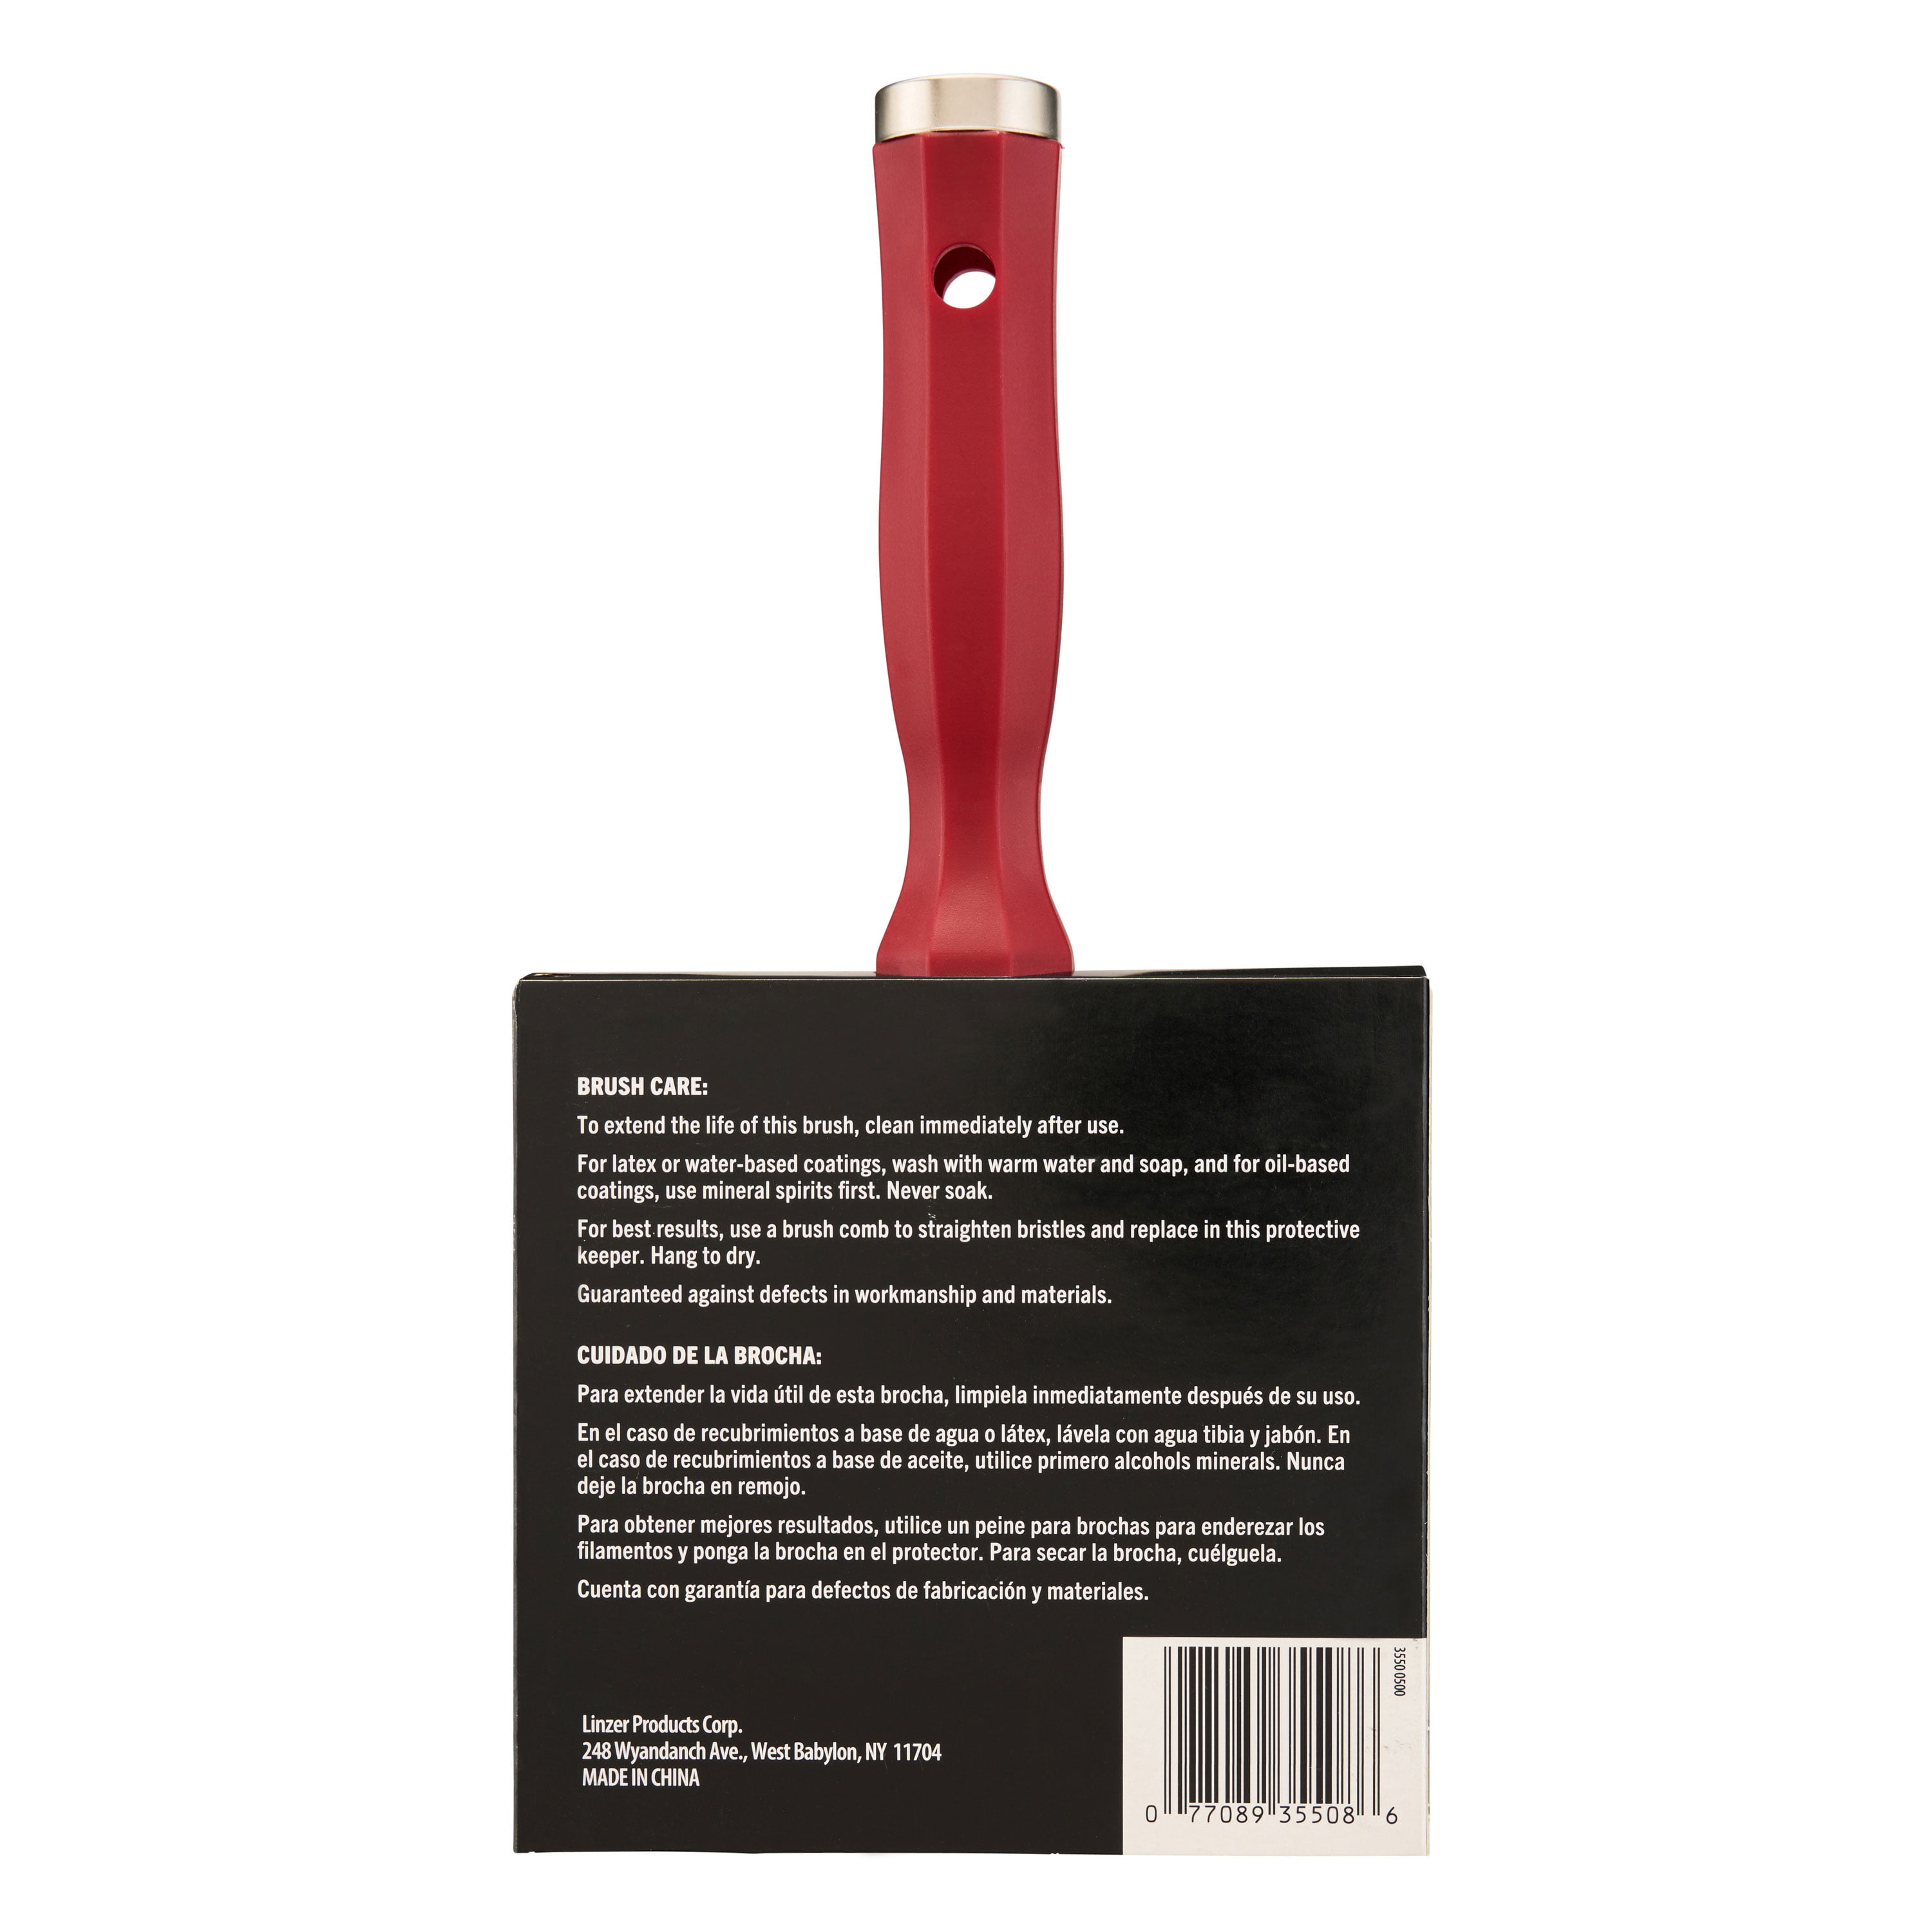 Wholsale Pricing Polyester Paint Brushes - Mazer Wholesale, Inc.